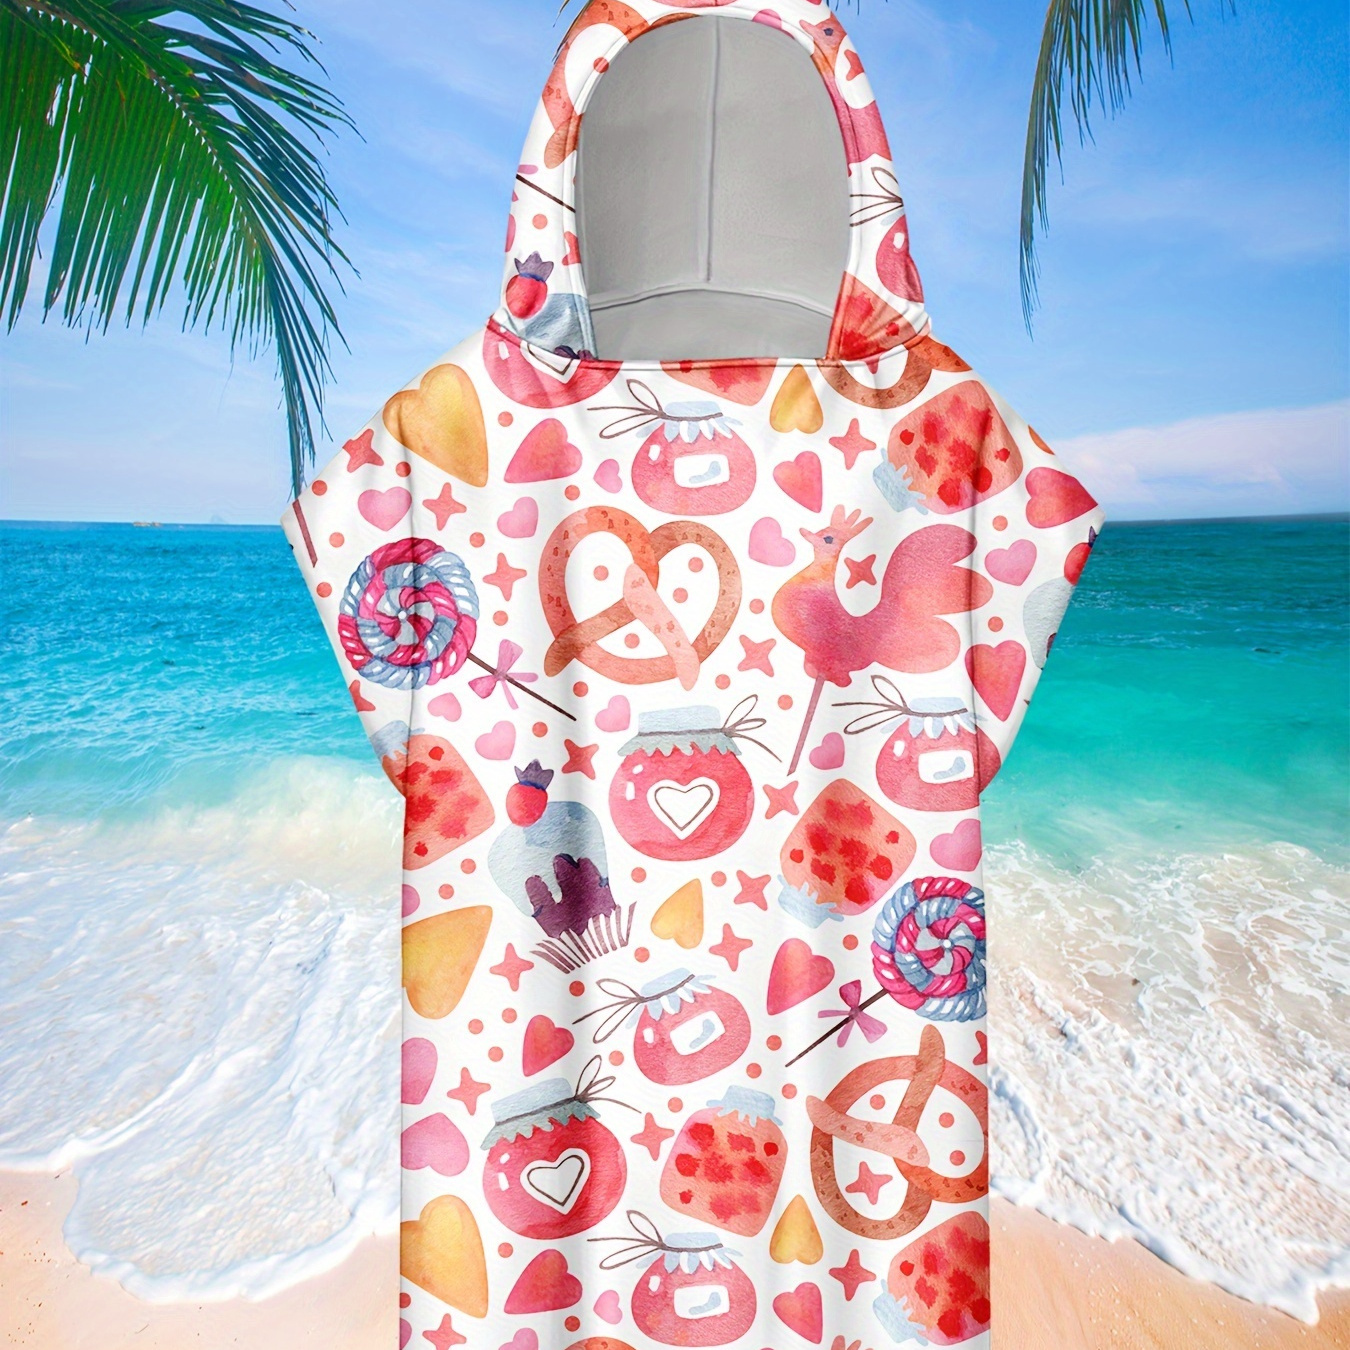 

1pc Candy Hooded Bathrobe, Lightweight Hooded Beach Towel, Printed Soft And Comfortable Home Bathrobe, Wearable Beach Blanket Beach Clothes For Pool Beach Travel, Suitable For Girls 3-11y Years Old